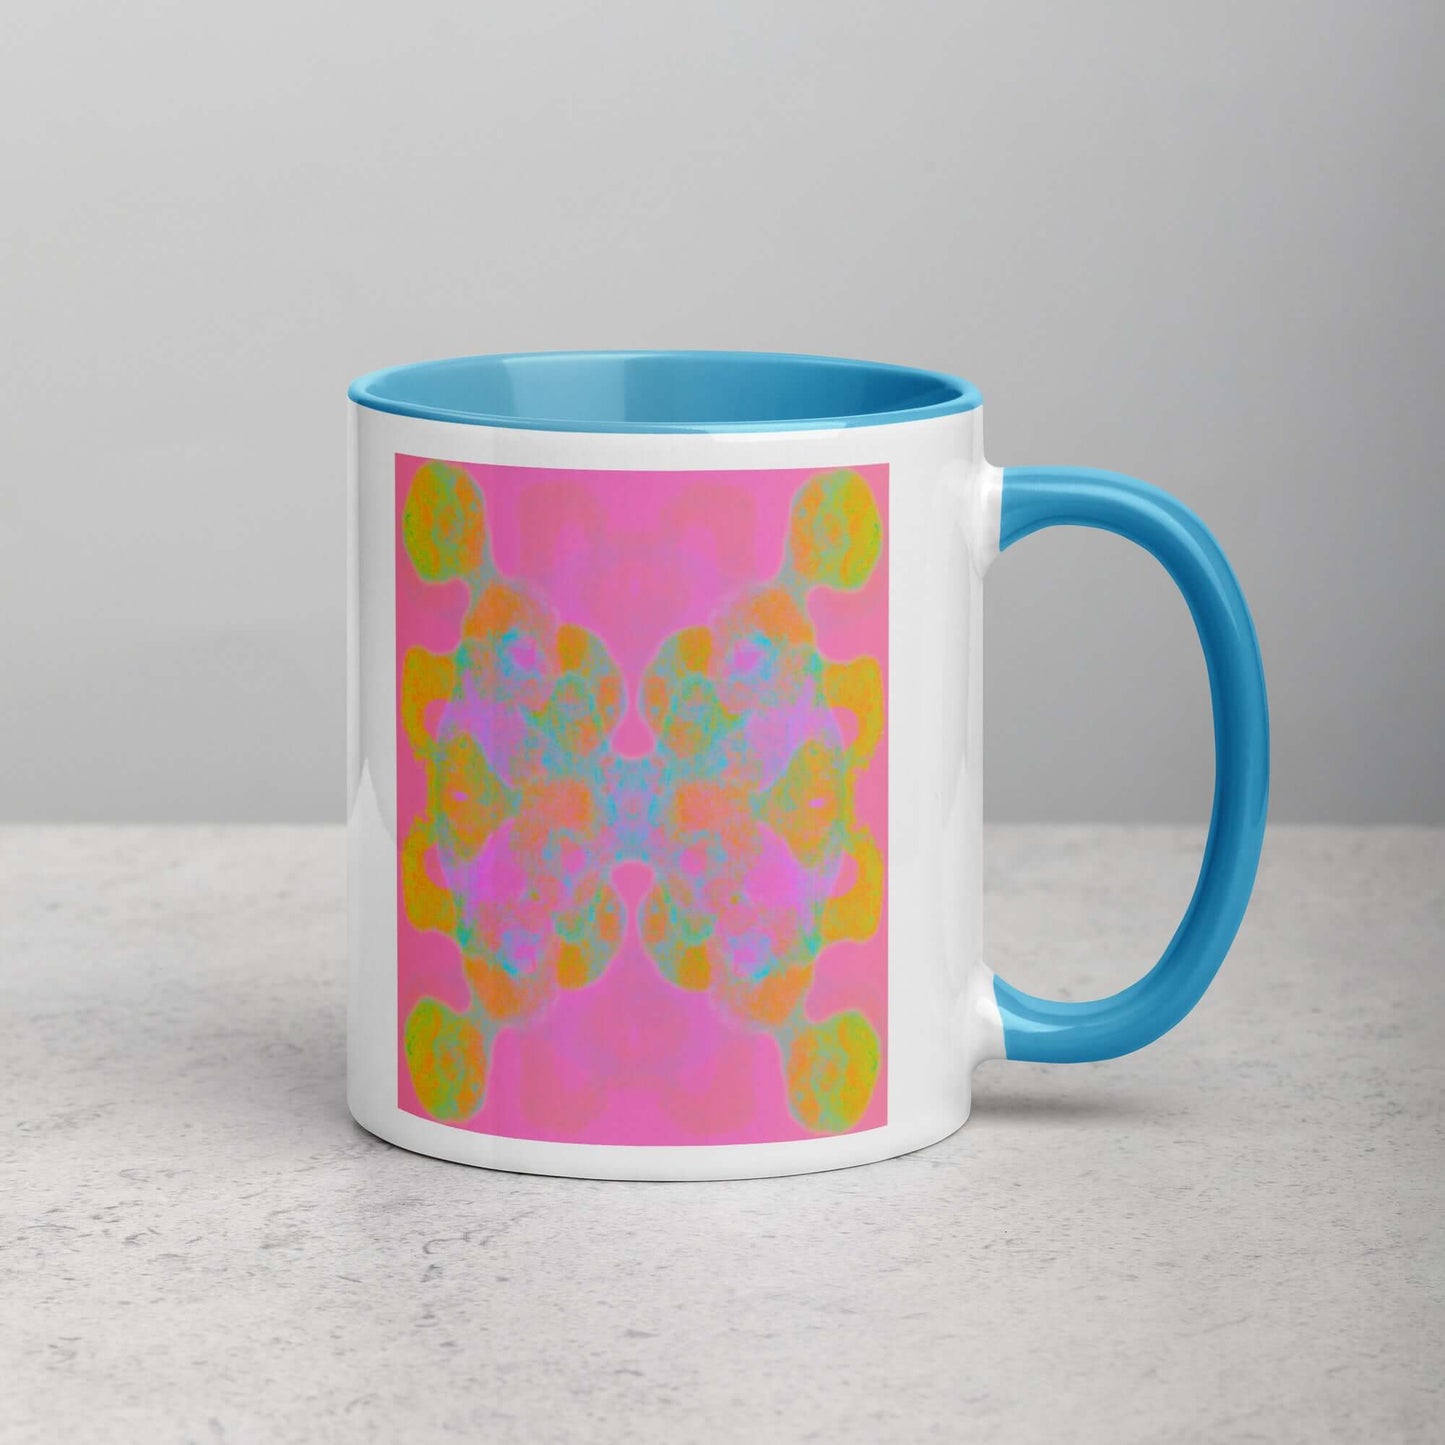 Colorful Abstract Butterfly Shape on Pink Background “Double the Fun” Abstract Art Mug with Light Blue Color Inside Right Handed Front View